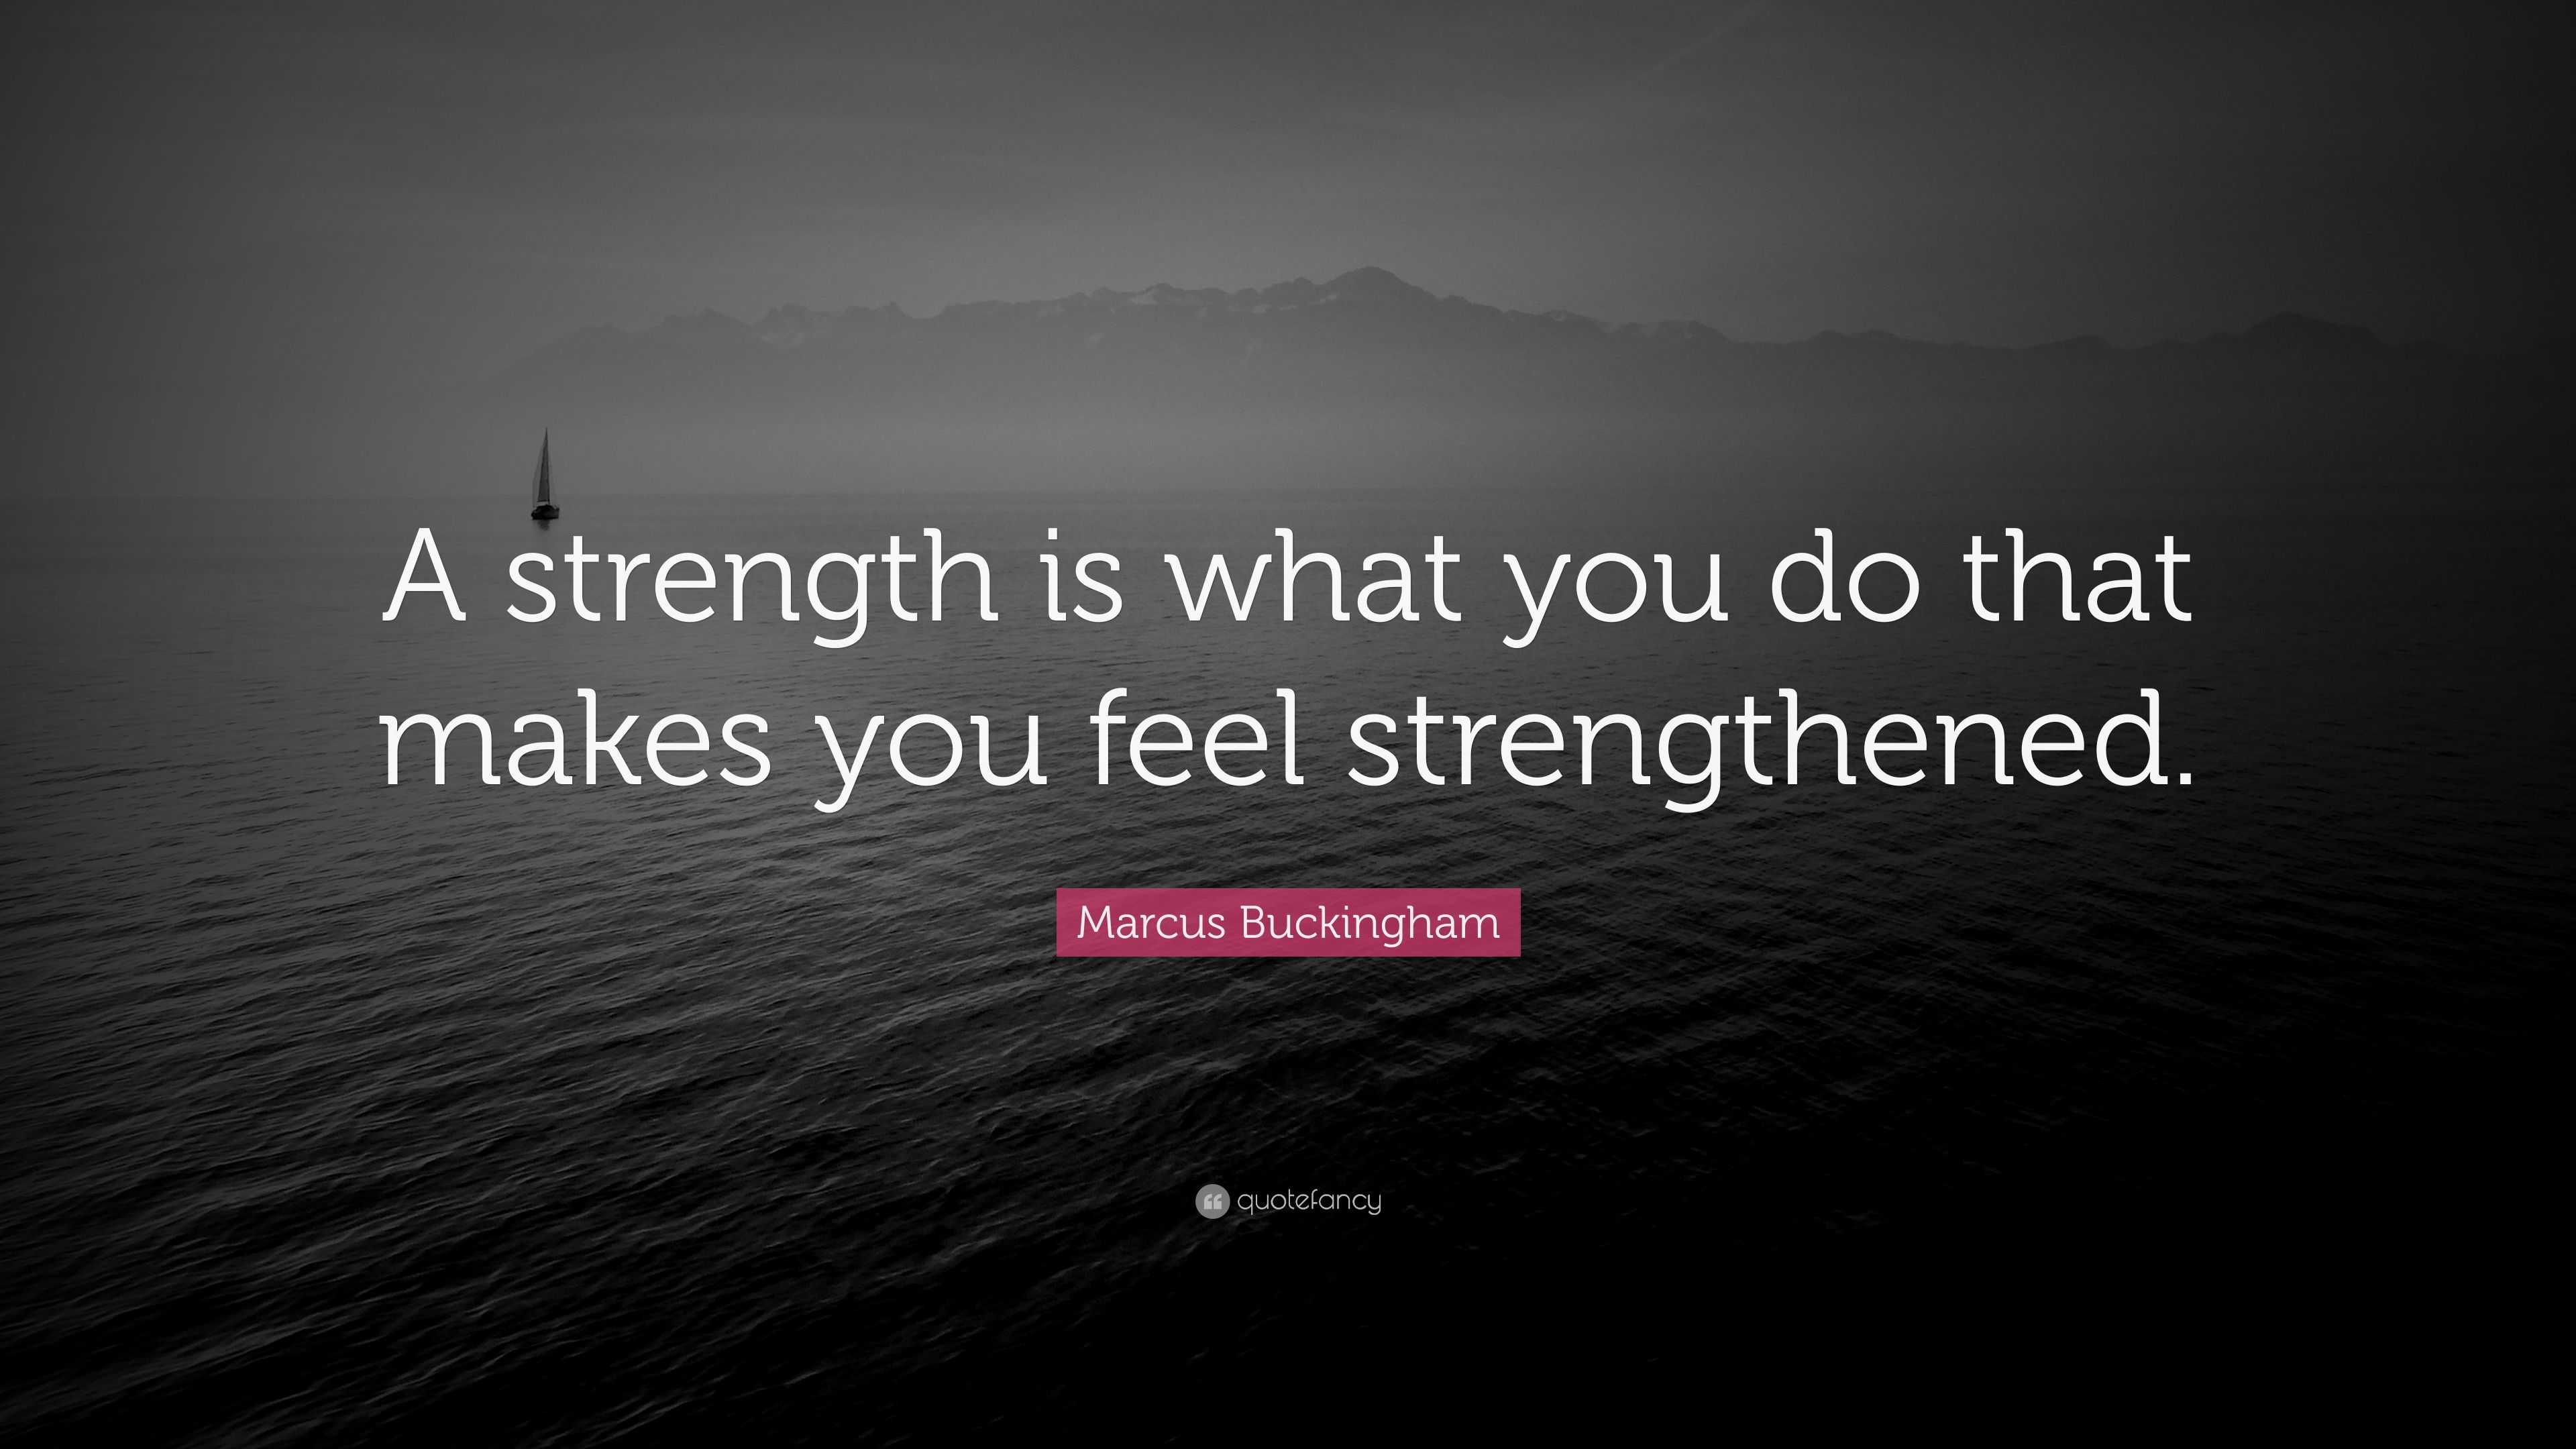 Marcus Buckingham Quote: “A strength is what you do that makes you feel ...